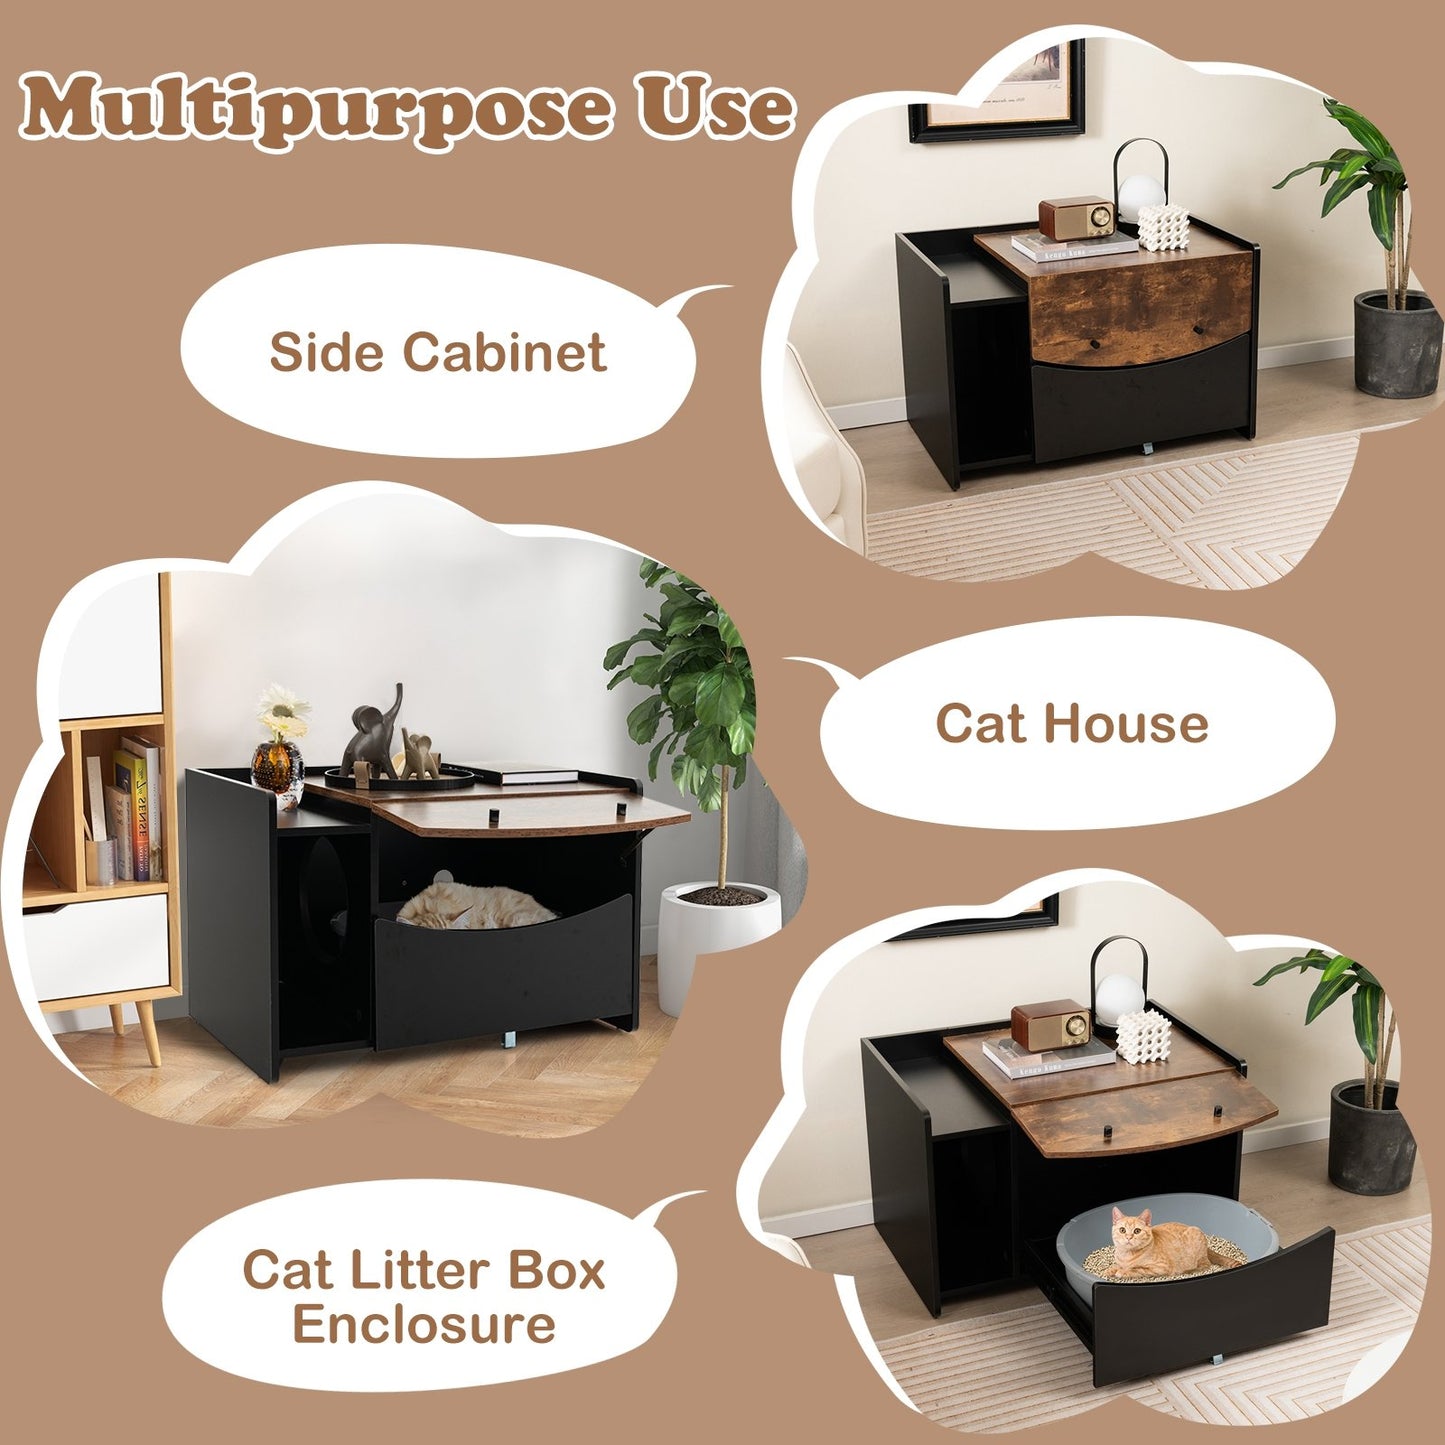 Cat Litter Box Enclosure with Pull-out Drawer, Black